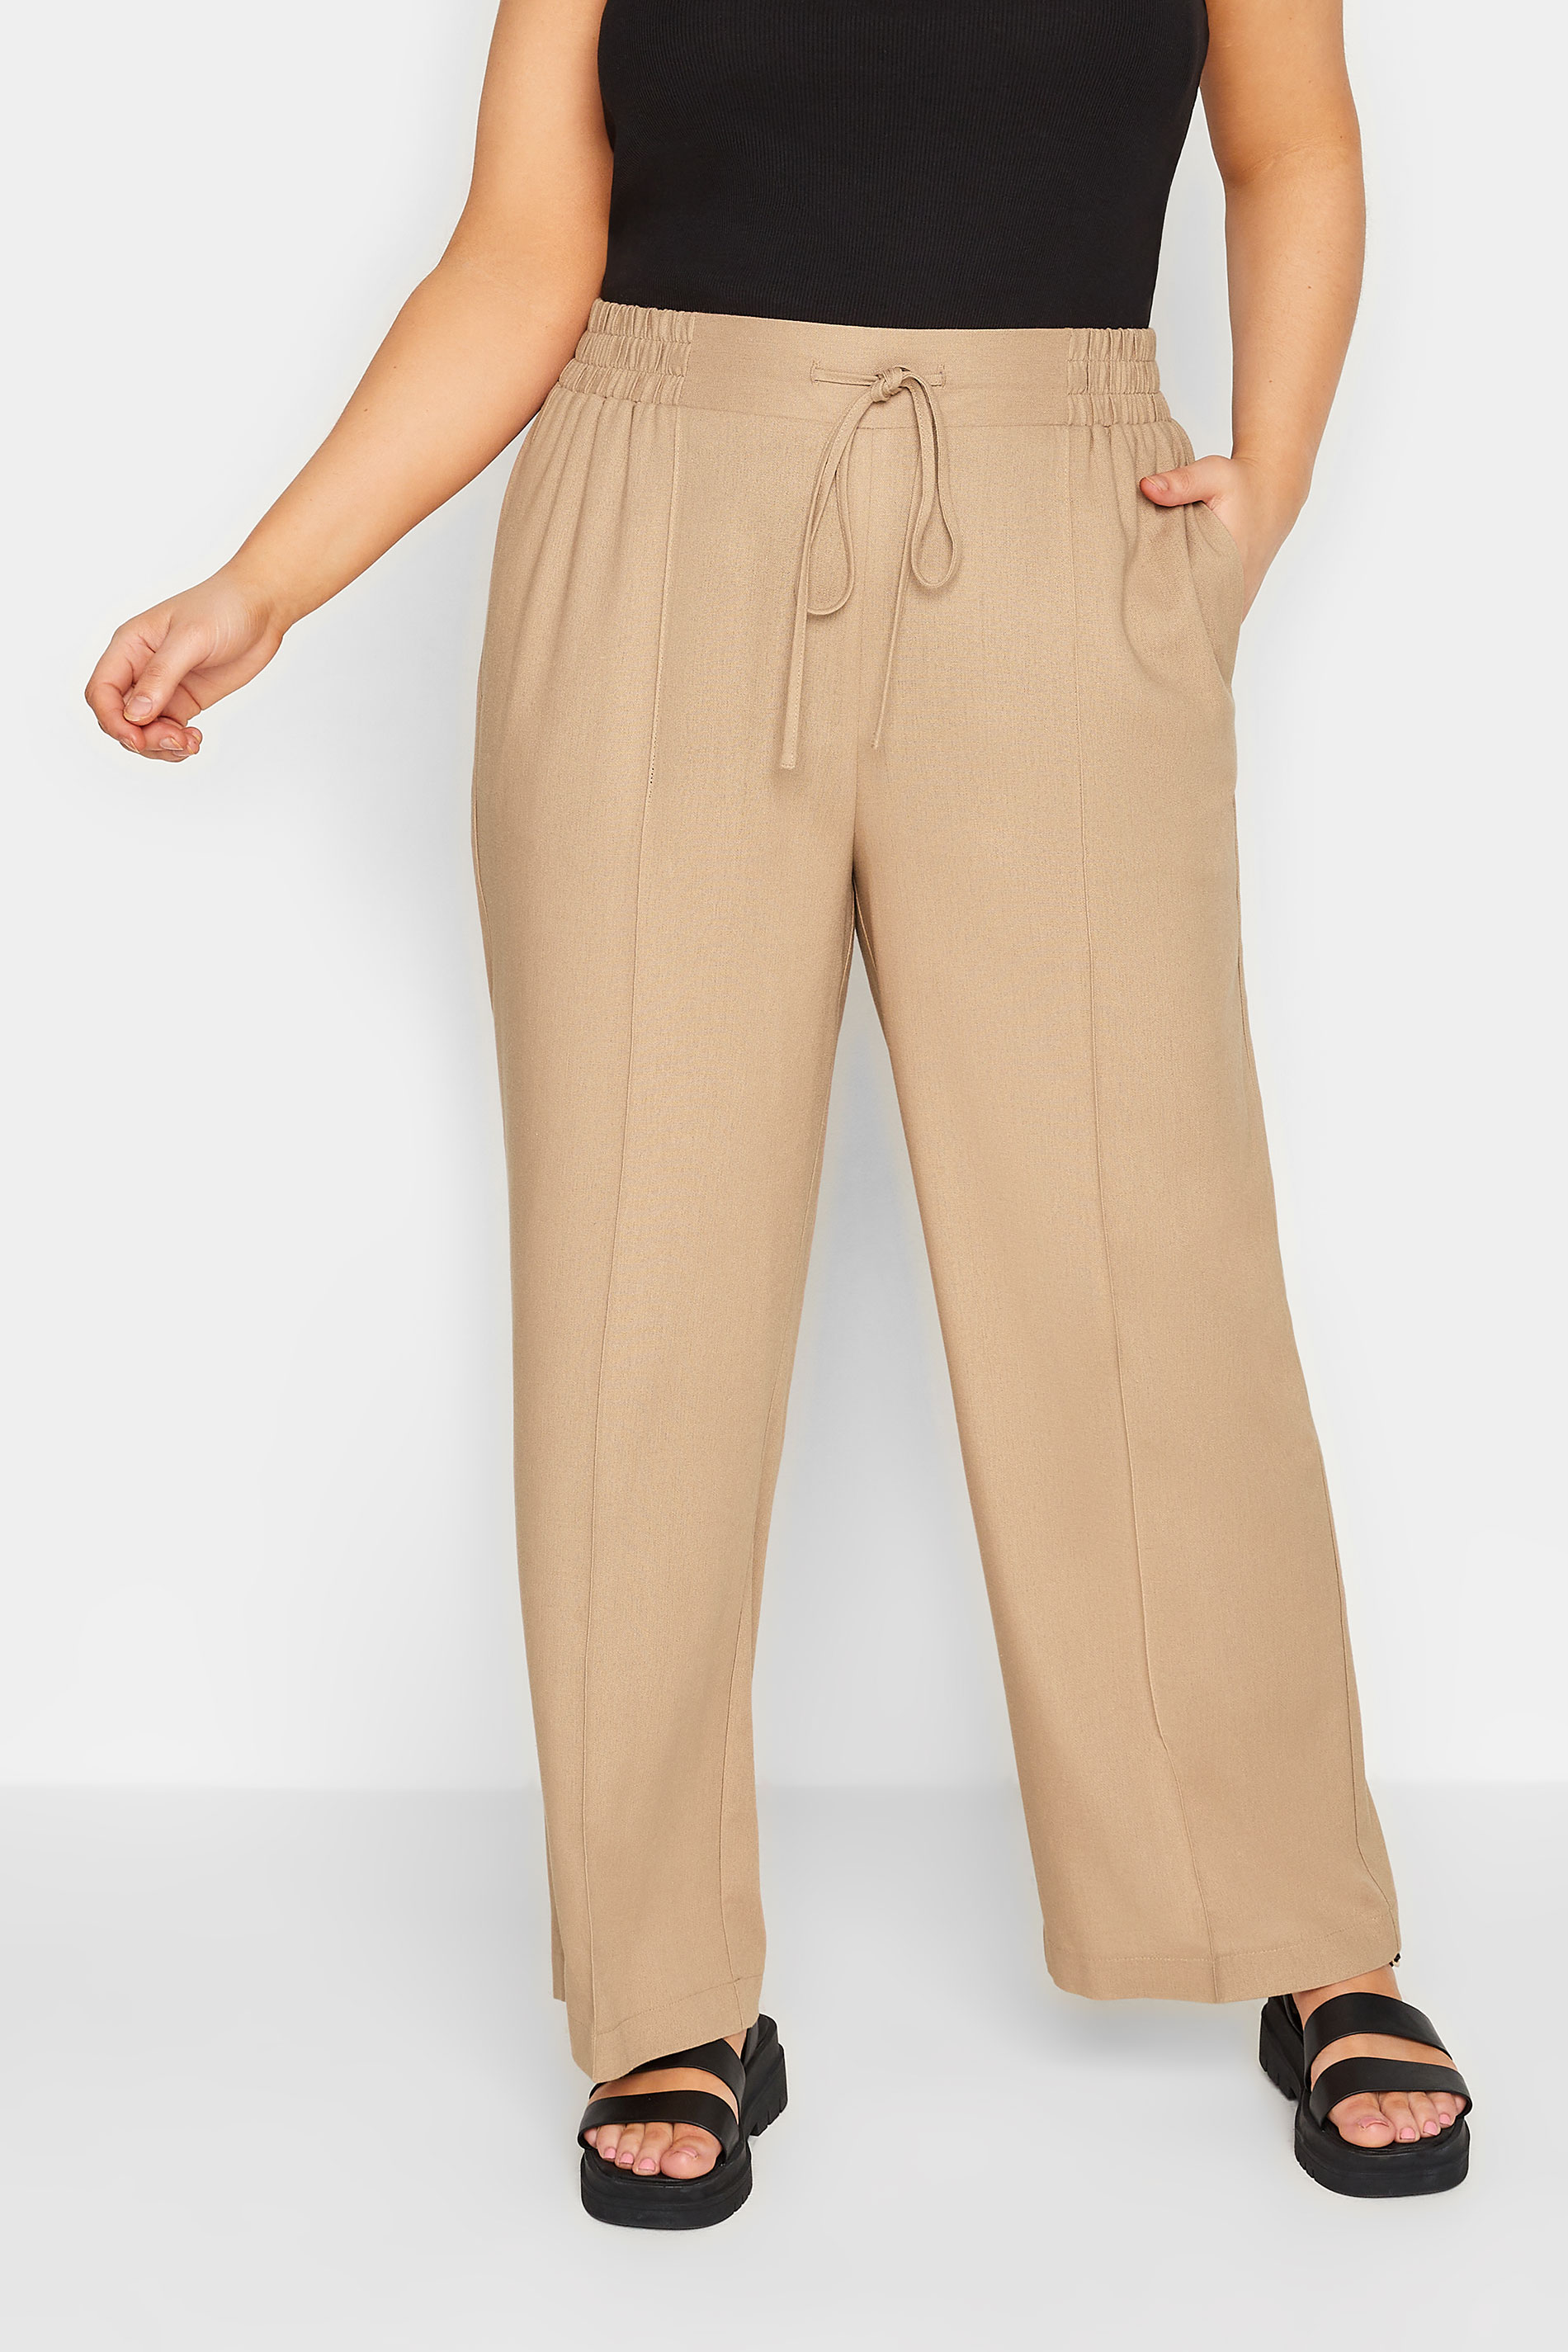 YOURS Curve Plus Size Beige Brown Wide Leg Linen Look Trousers | Yours Clothing  1